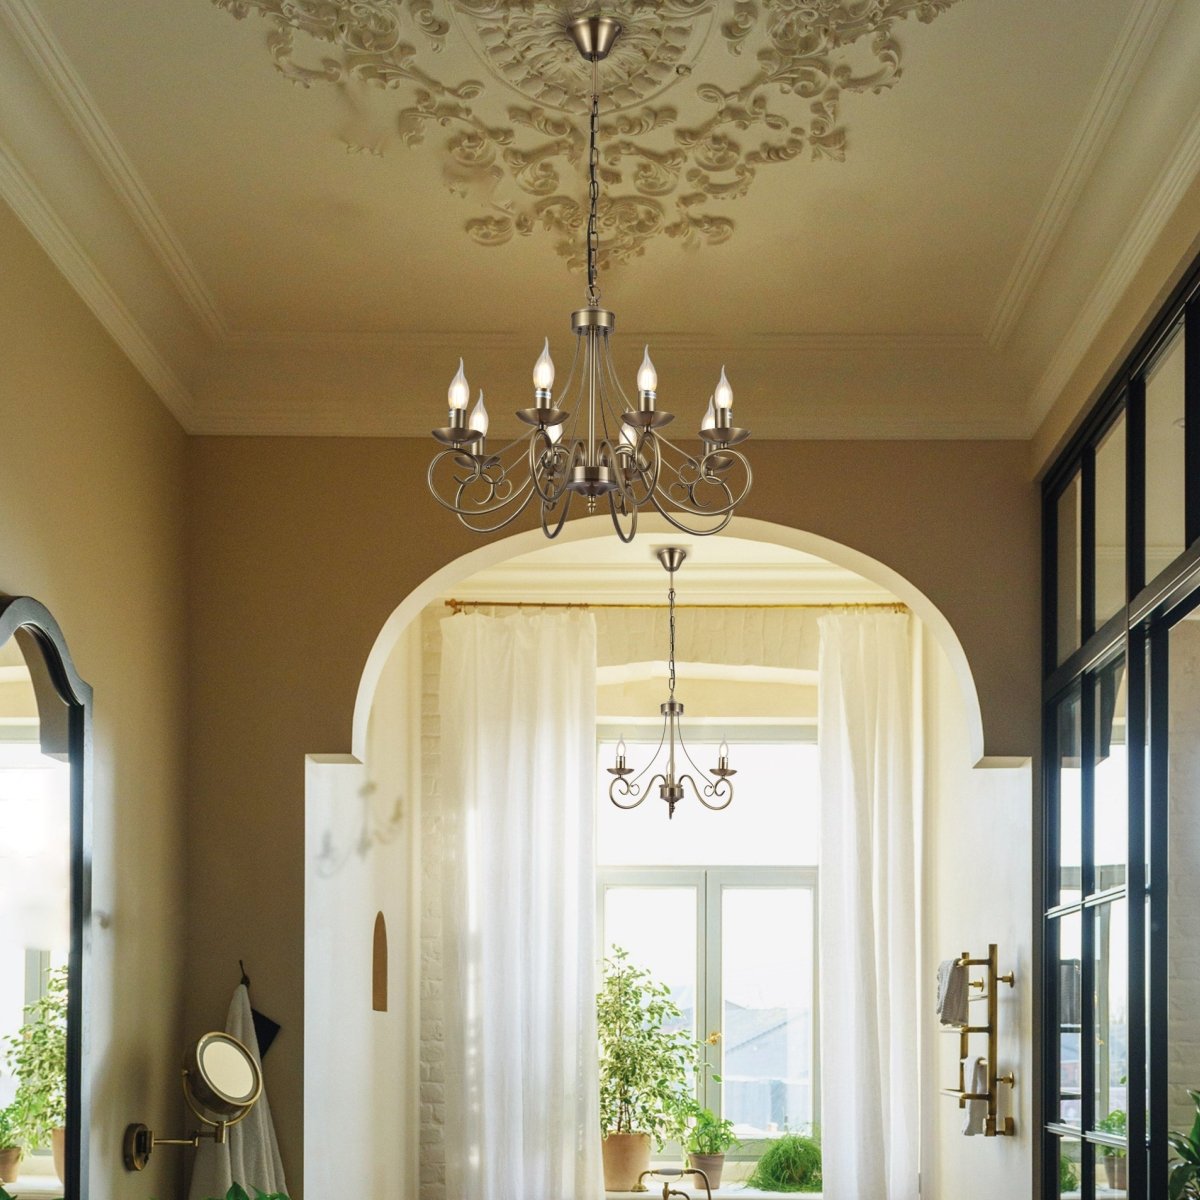 Hall lobby entrance lounge Interior application of Candle Vintage Antique Brass French Chandelier Ceiling Light